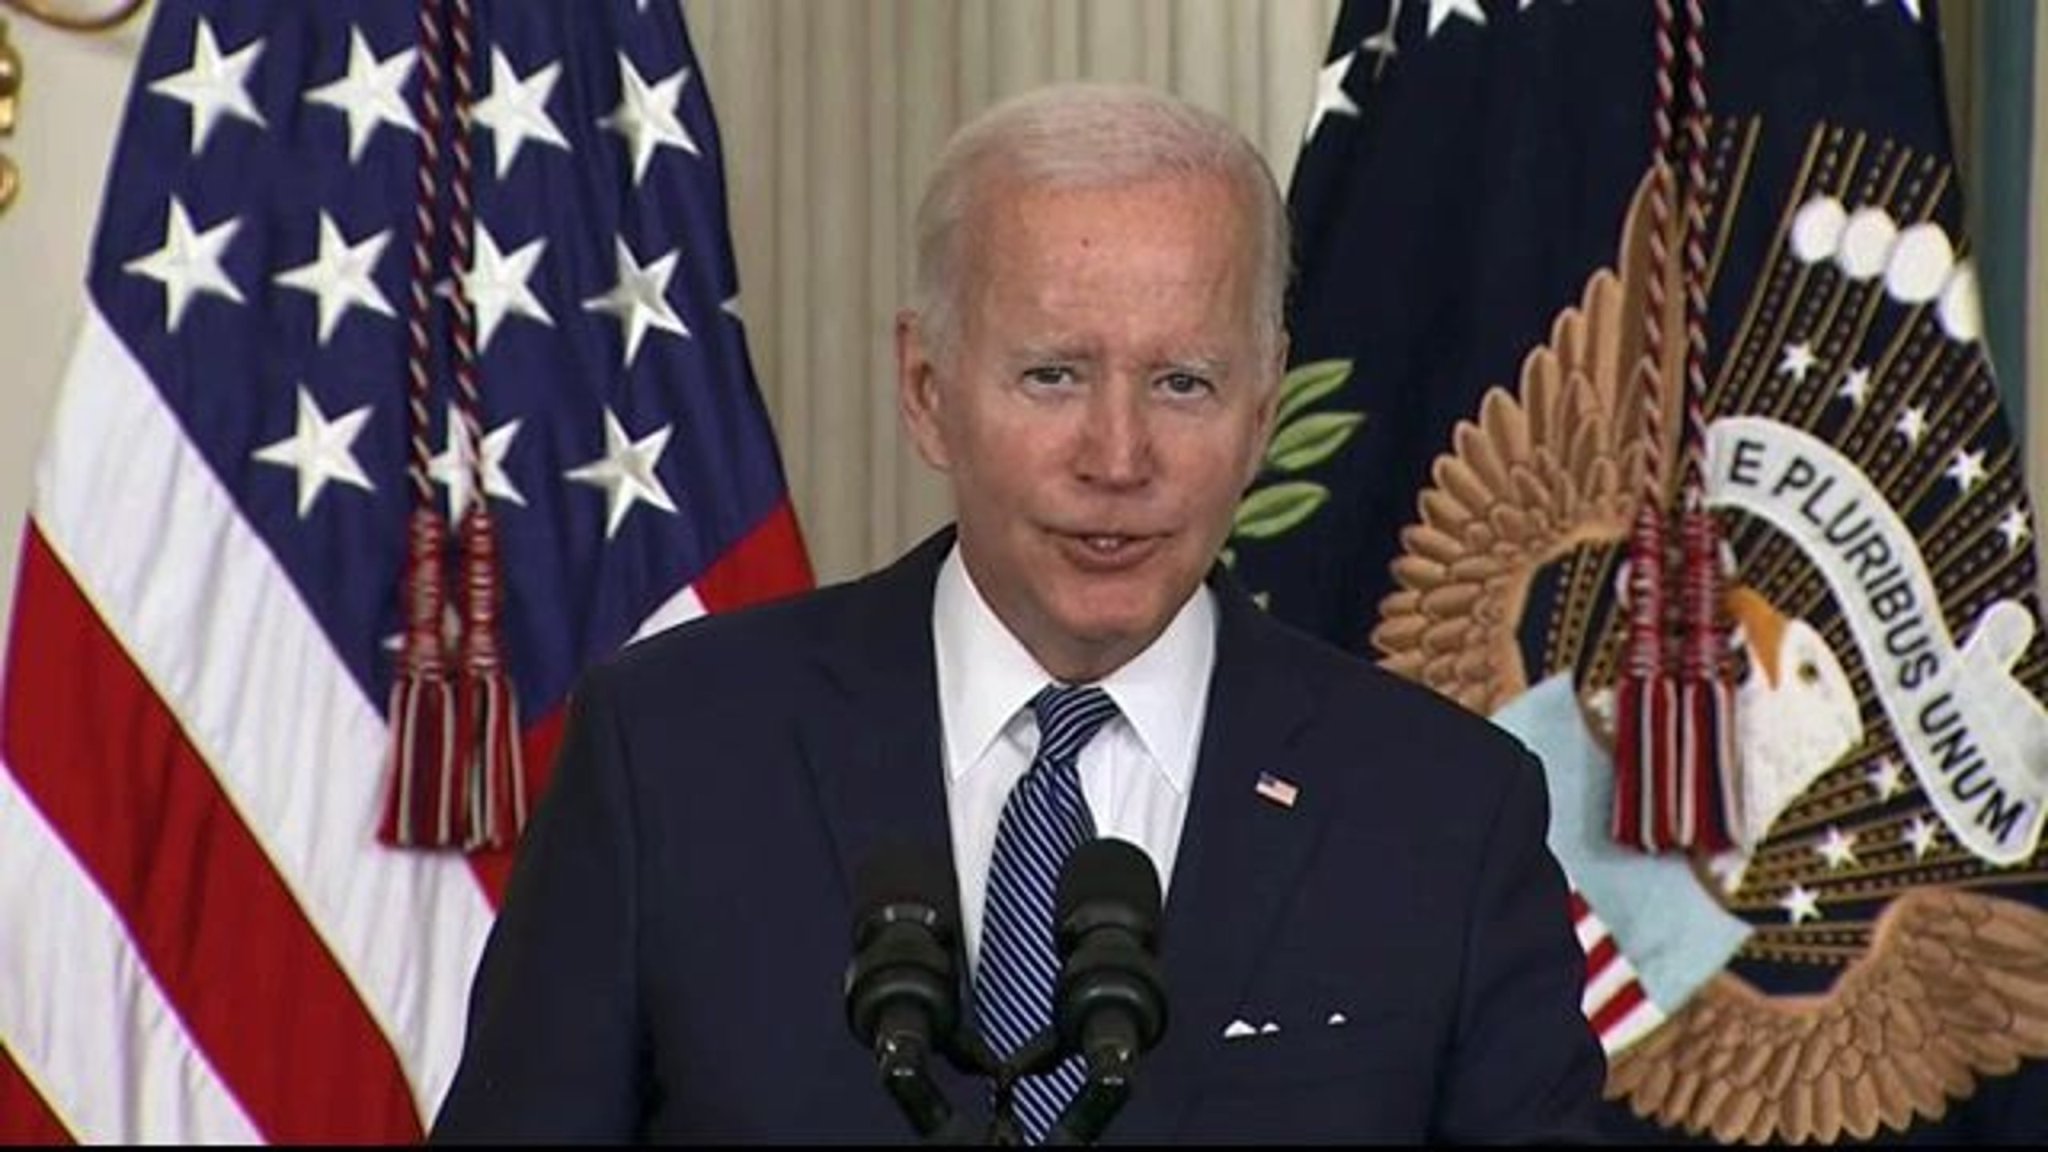 Biden jokes with Sen. Manchin (D-WV): "Joe had an operation on his shoulder ... It wasn’t because of anything we did.”